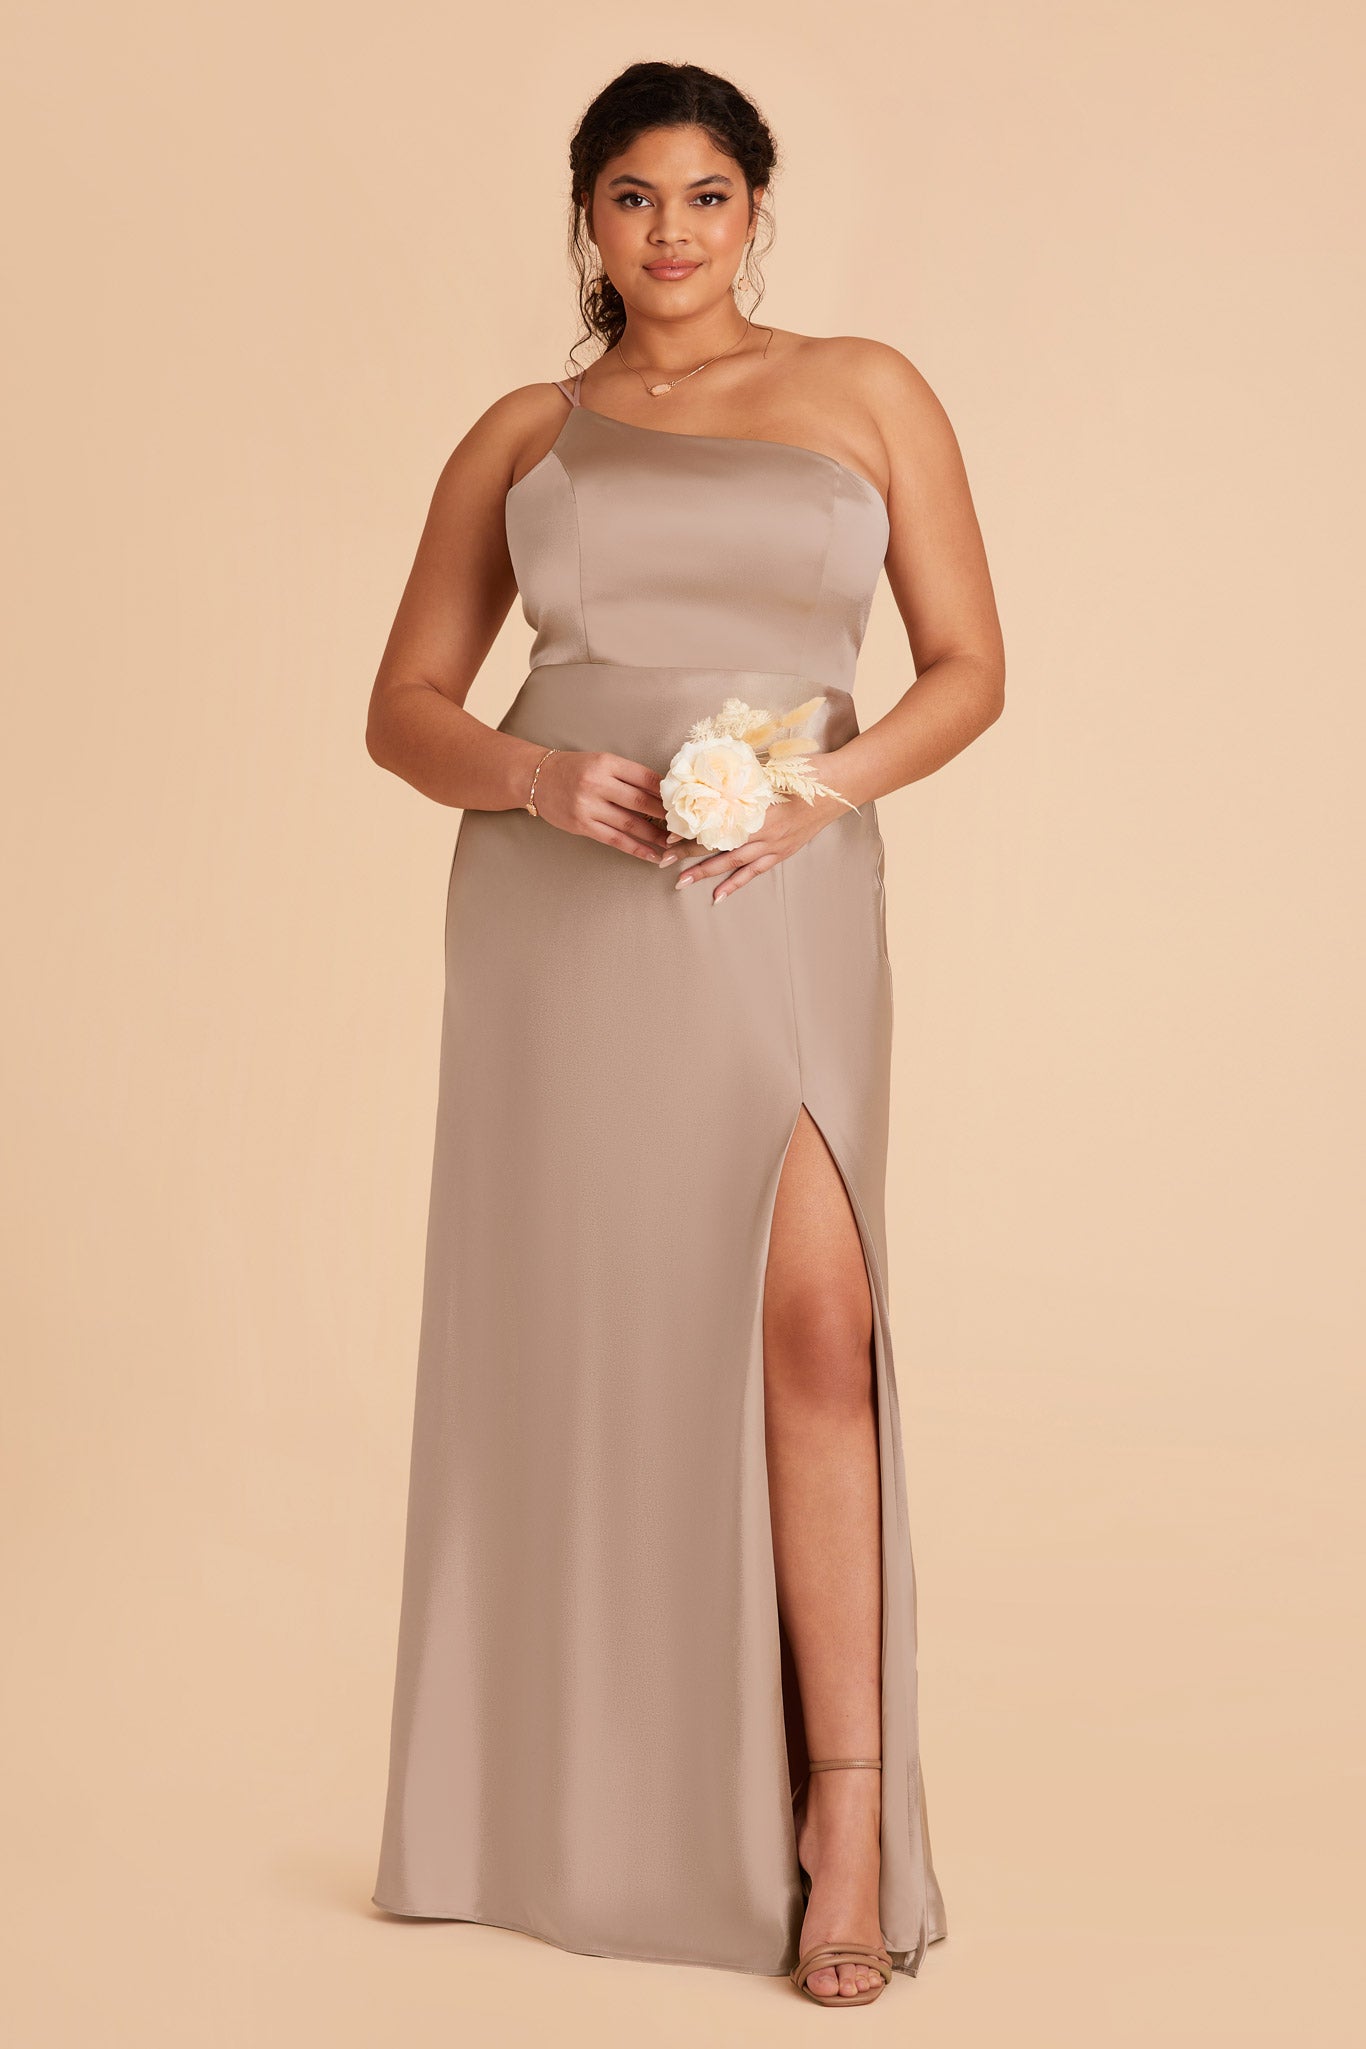 Matte Satin Dress in Taupe by Birdy Grey